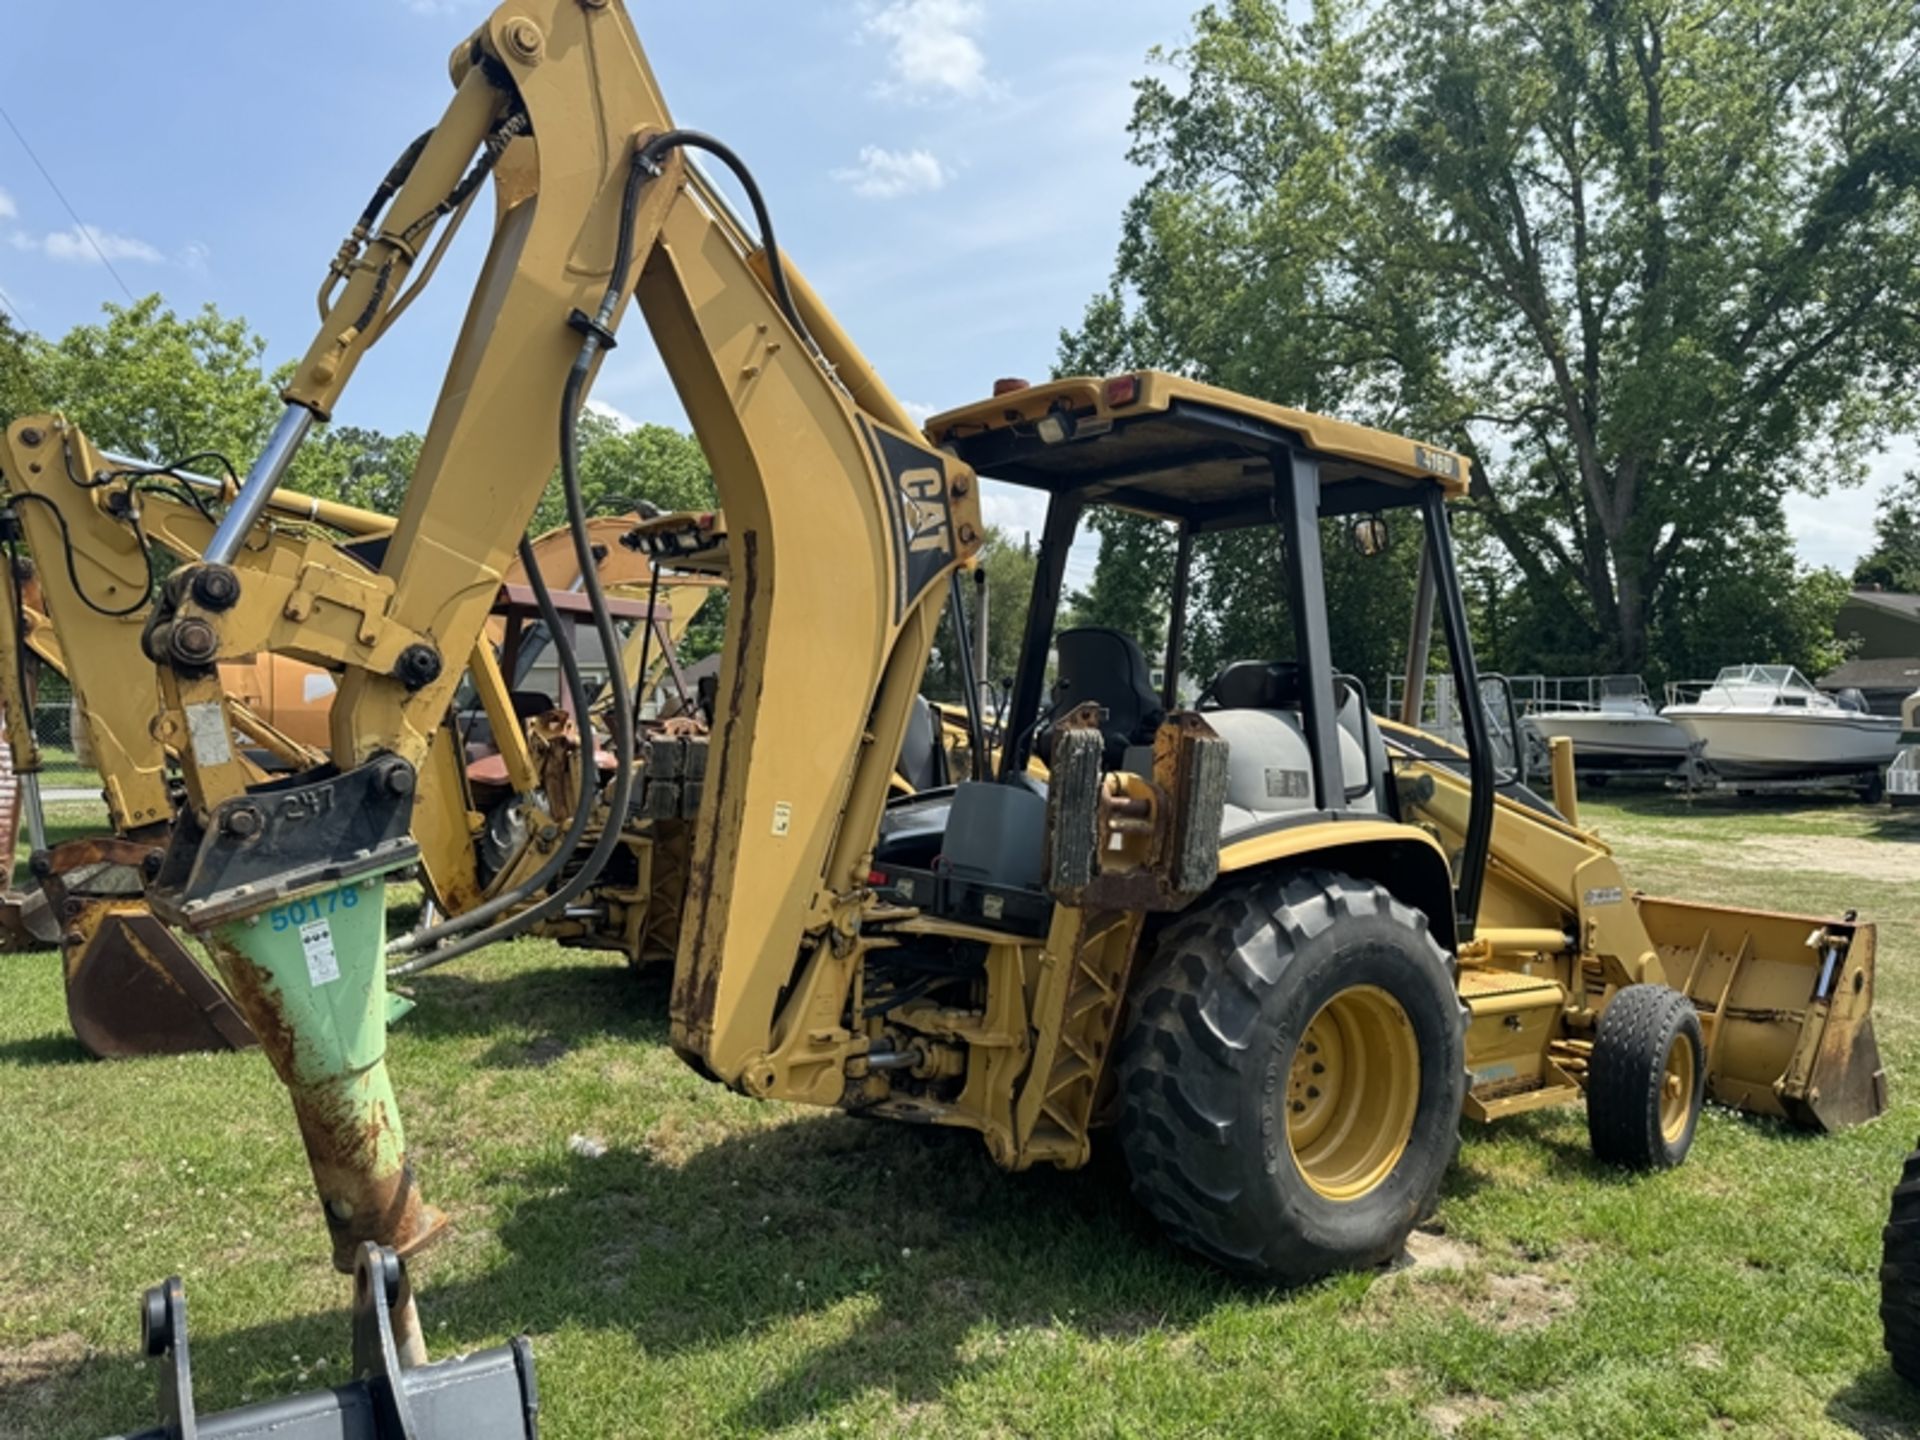 CAT 416D backhoe, 2wd with TRAMAC SC36 jackhammer and 30" rear bucket – 2388 hours showing - - Image 3 of 5